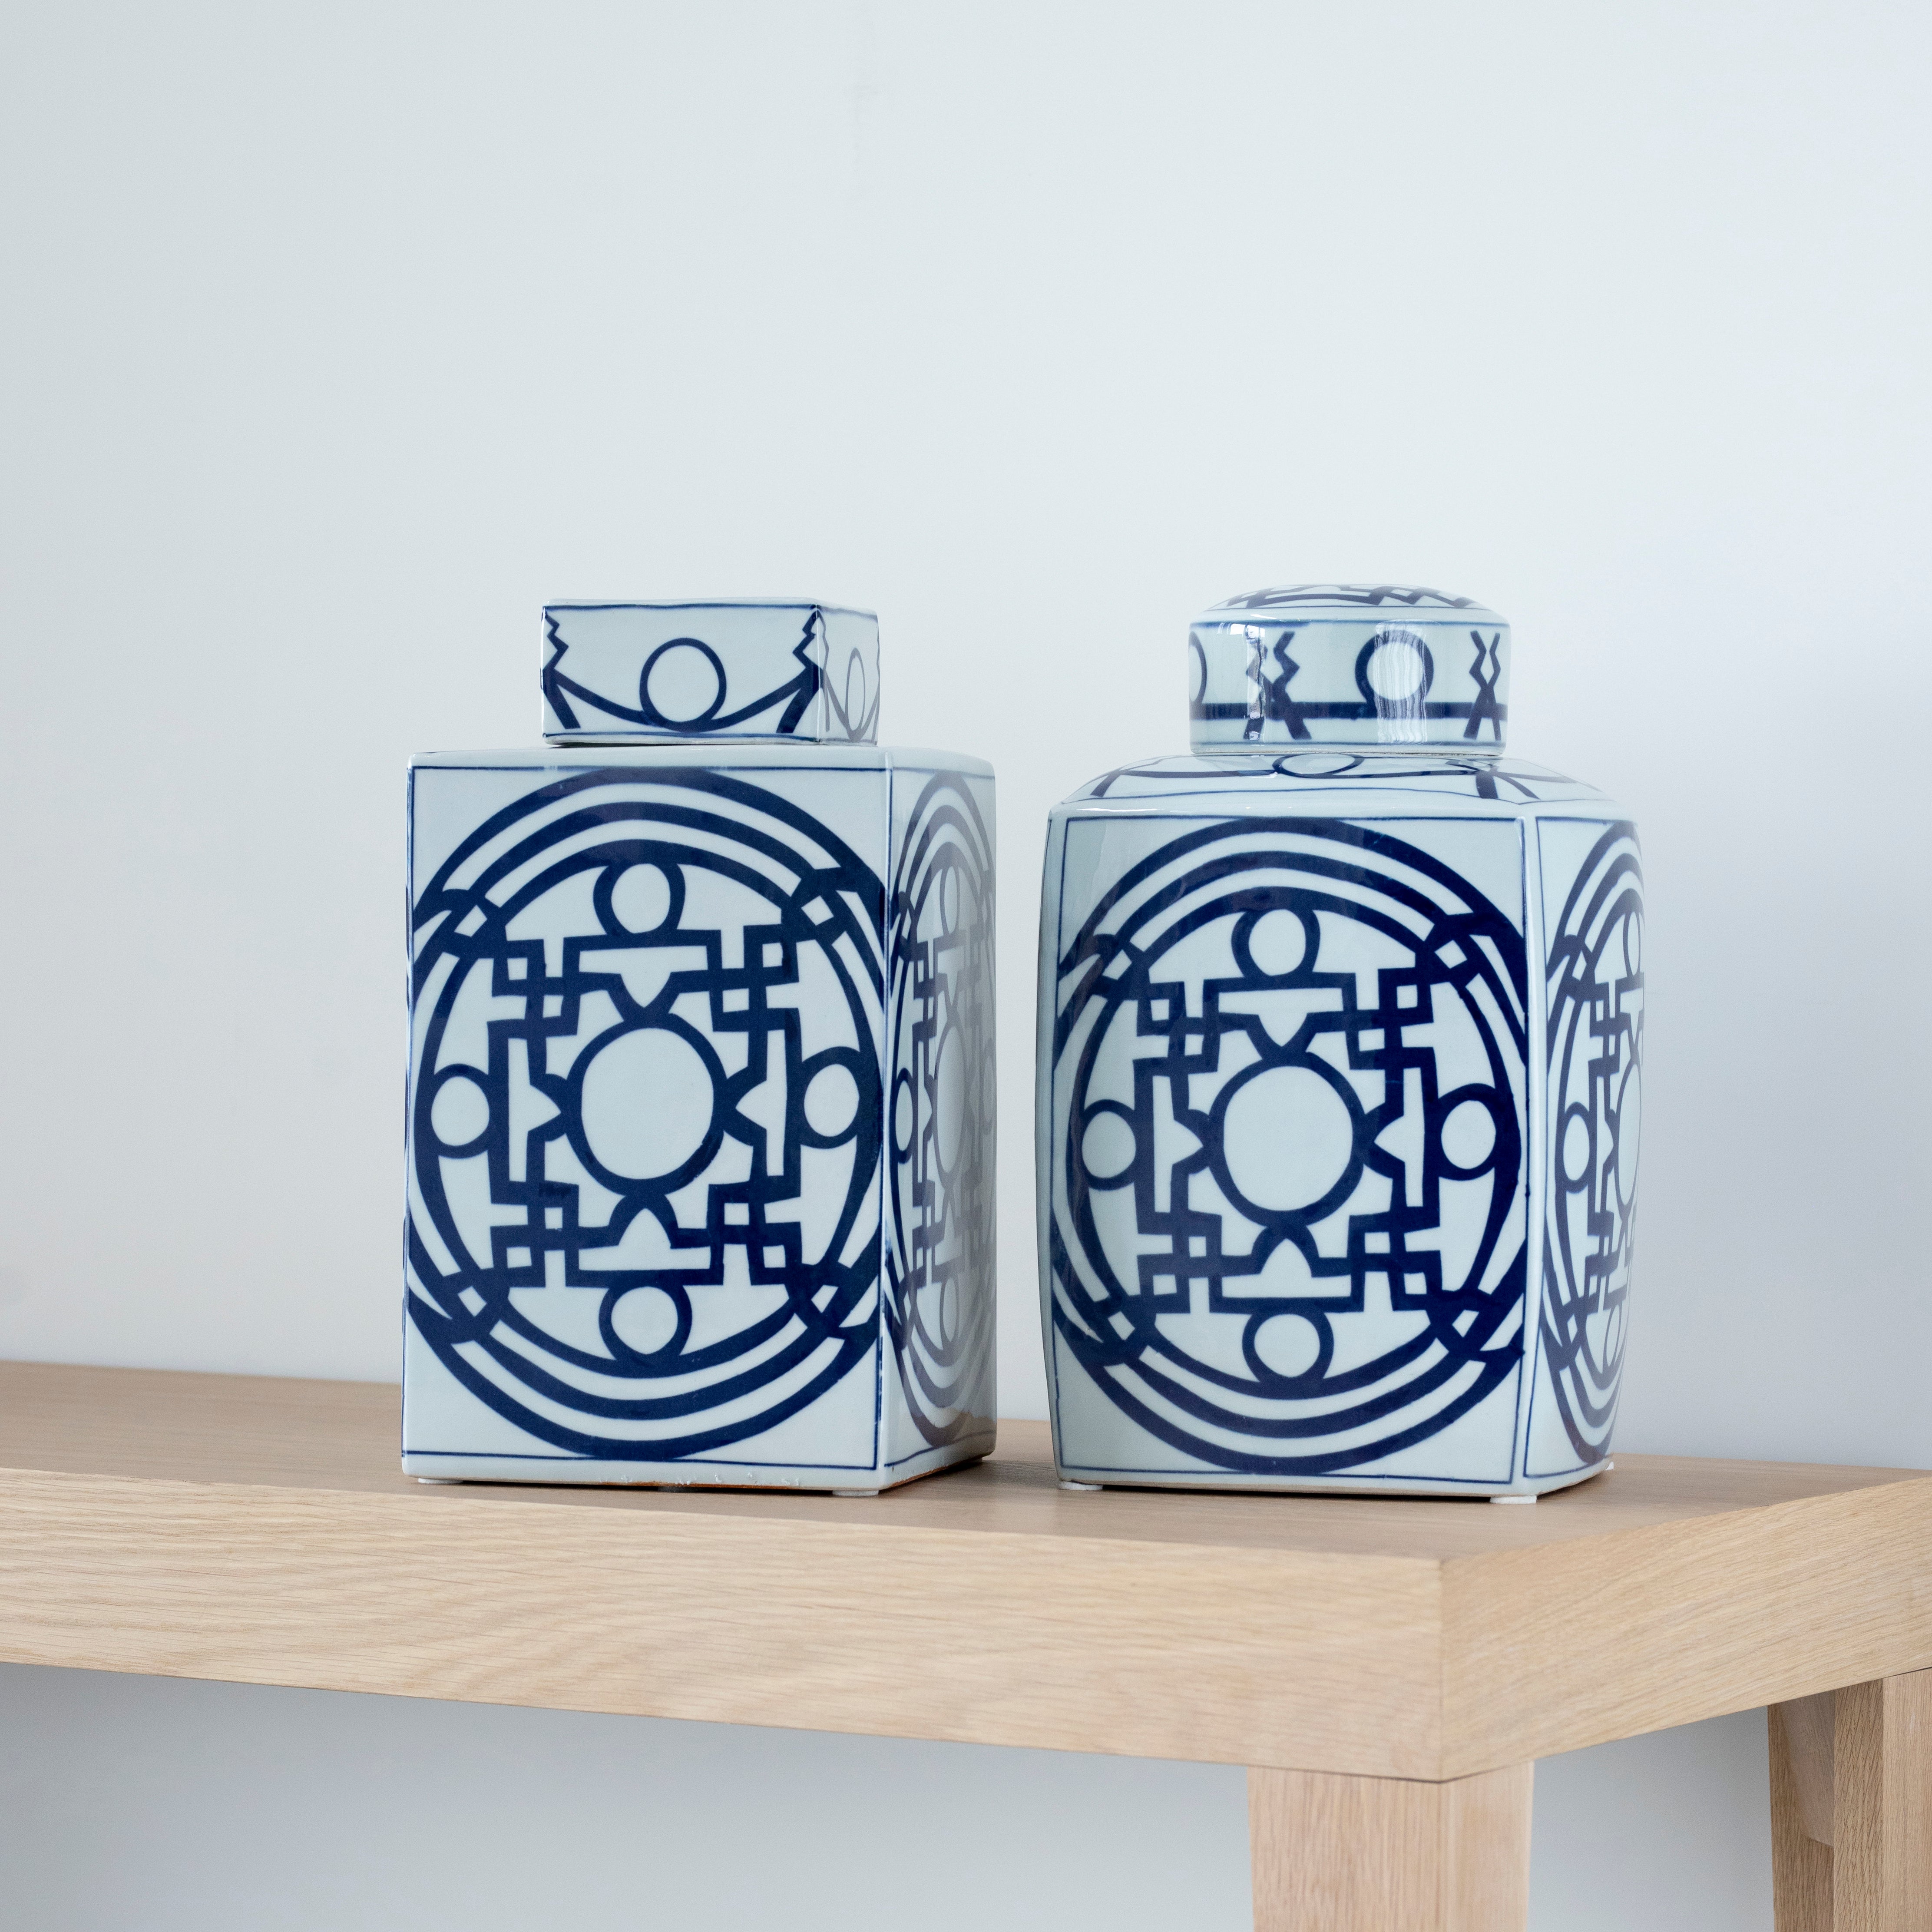 Set/2 Qing Porcelain Pots, Lusitanus Home Collection by Legend of Asia.

Real chinese porcelain waterproof pots with lids in white and dark blue, produced by hand with traditional methods. The longtime relationship between Portugal and Macau is